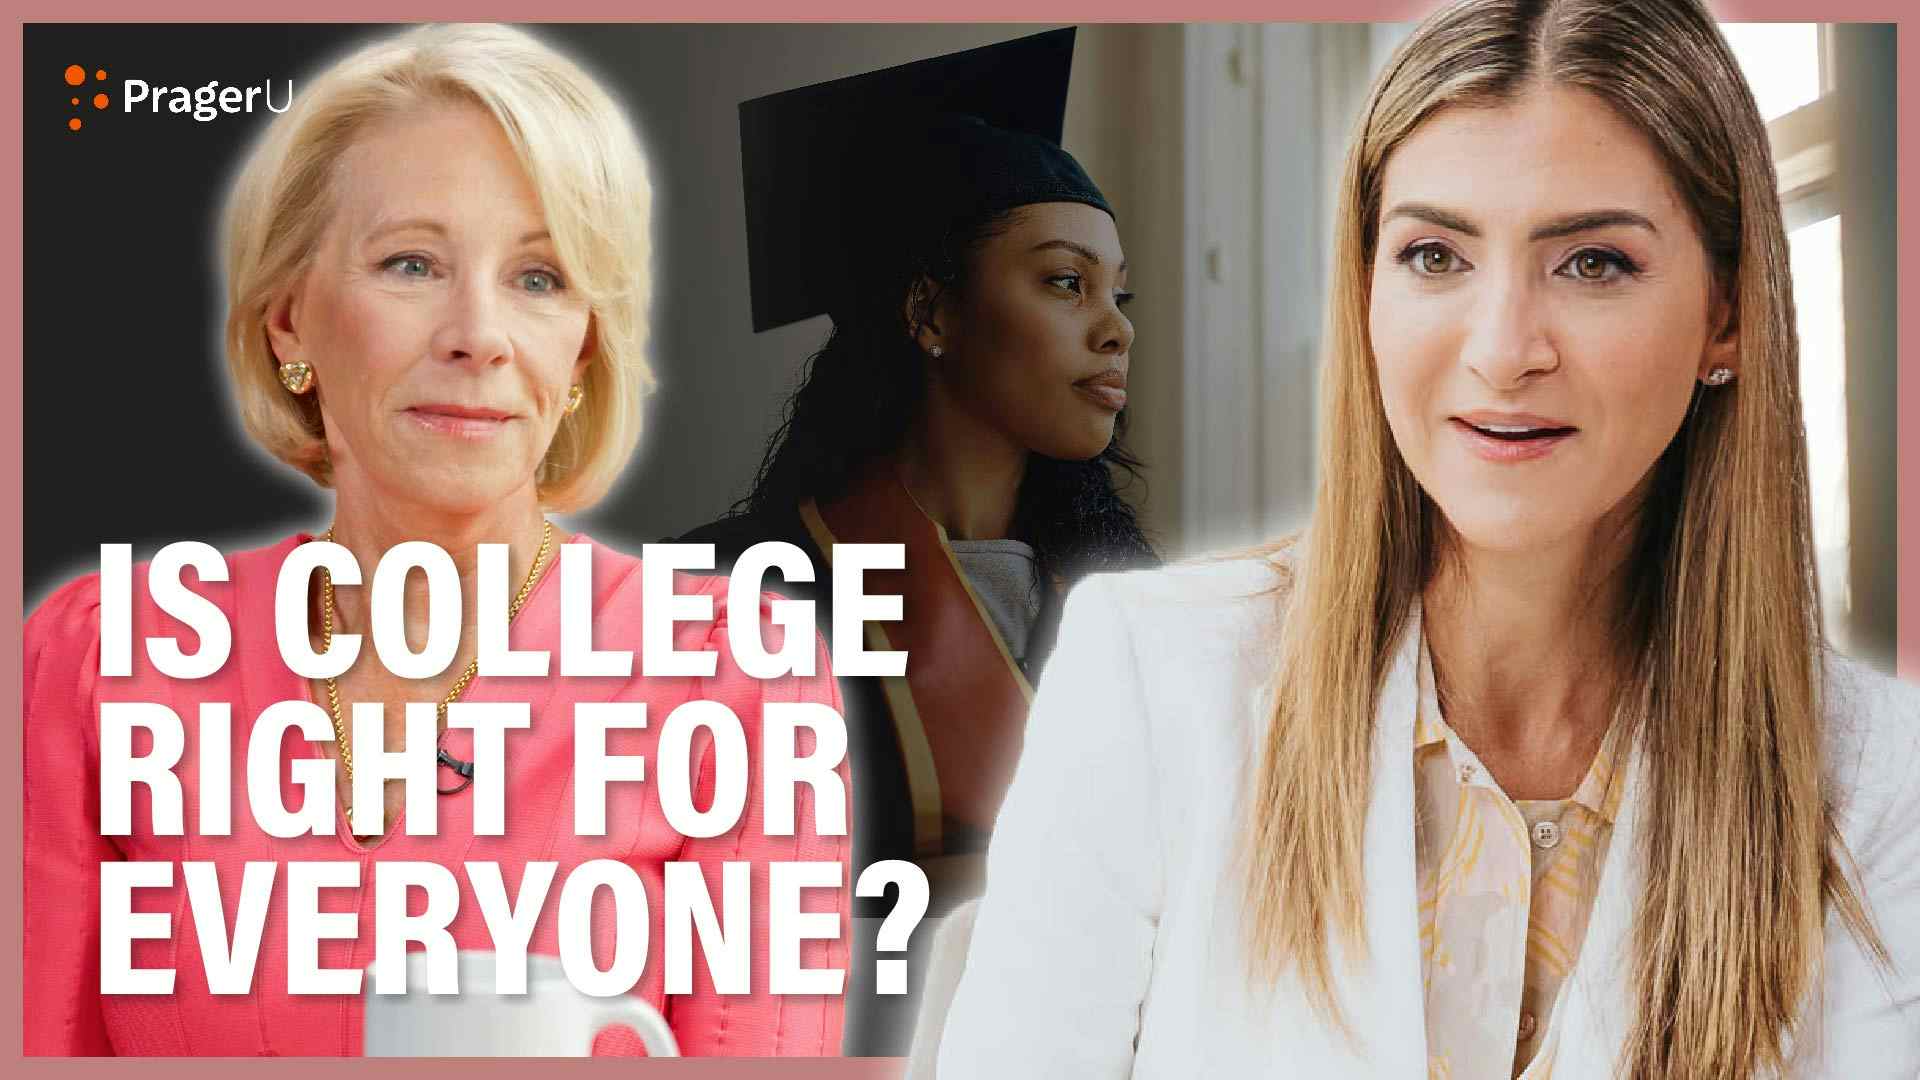 Is a College Degree Right for Everyone?